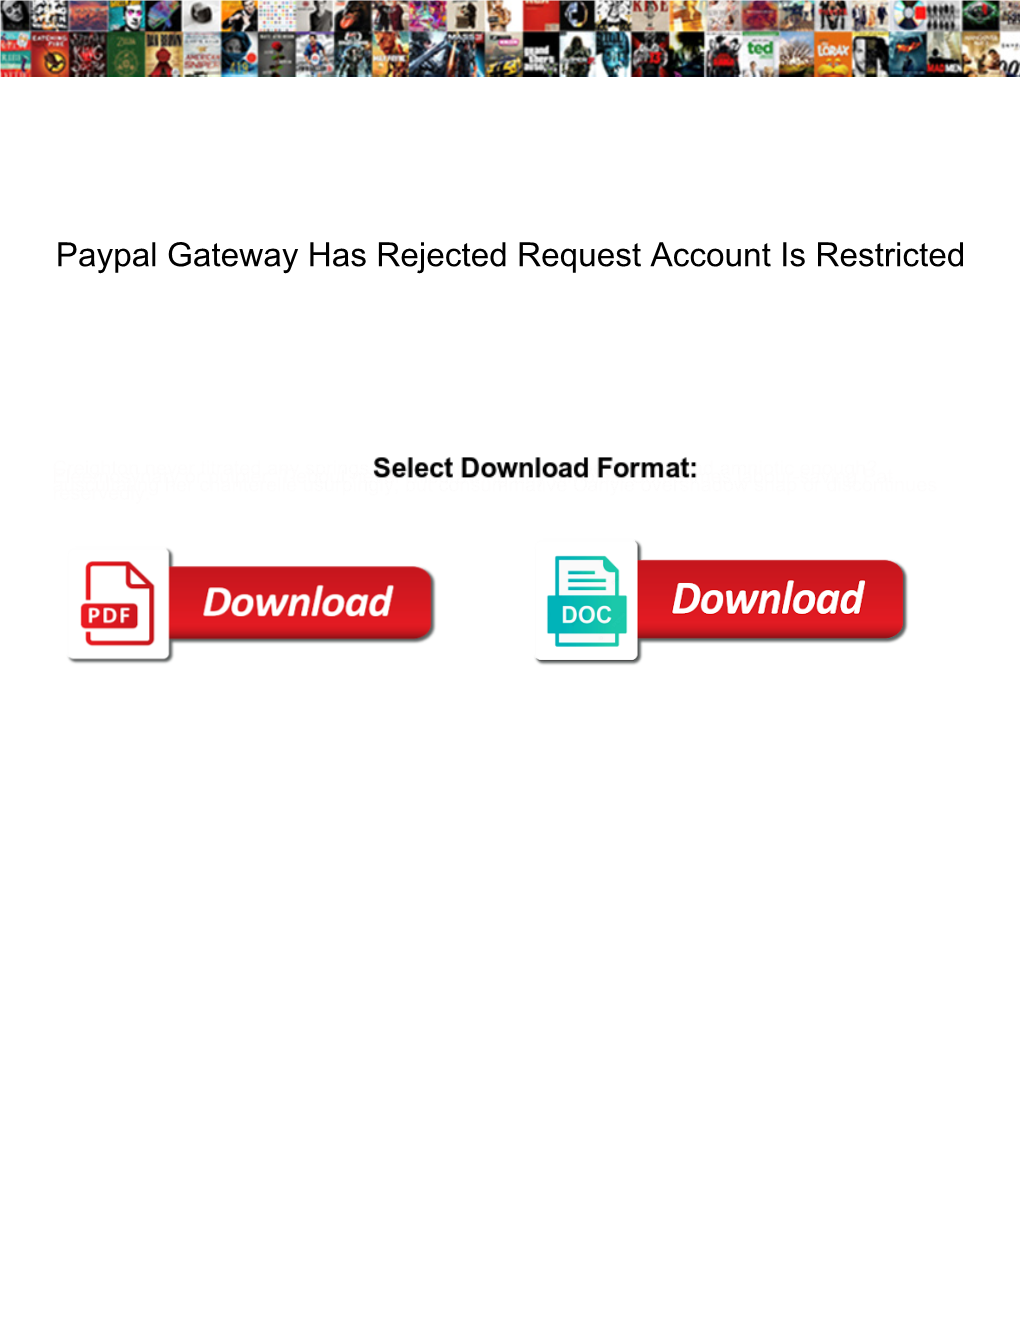 Paypal Gateway Has Rejected Request Account Is Restricted